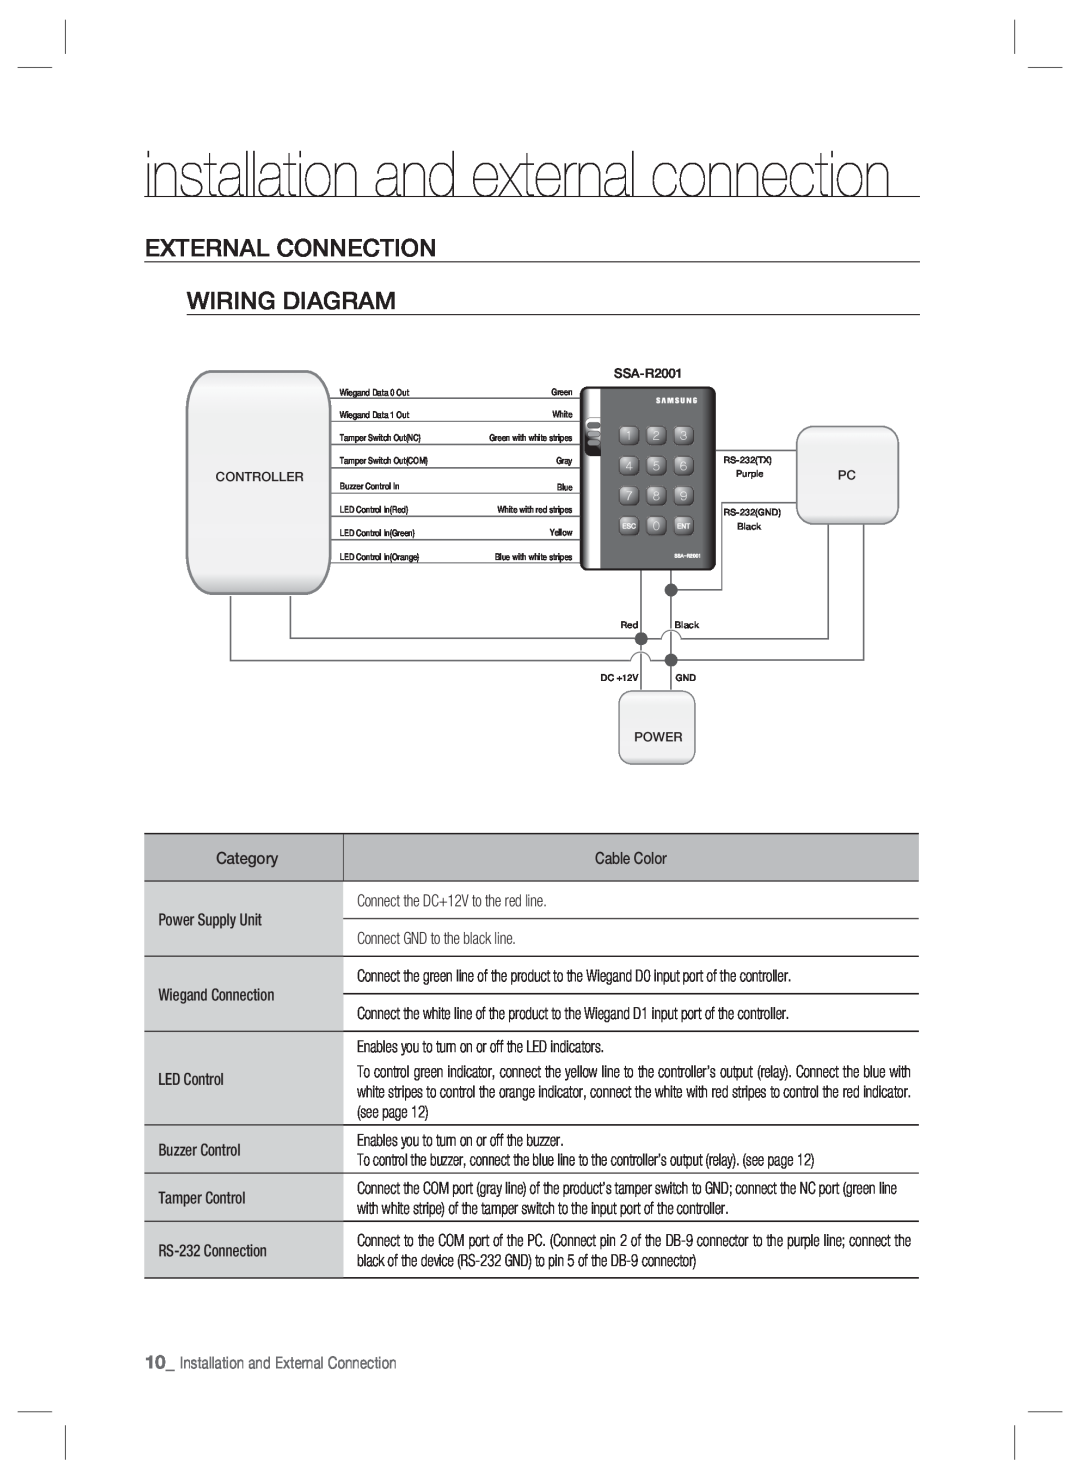 Samsung SSA-R2001 user manual External Connection Wiring Diagram, installation and external connection 